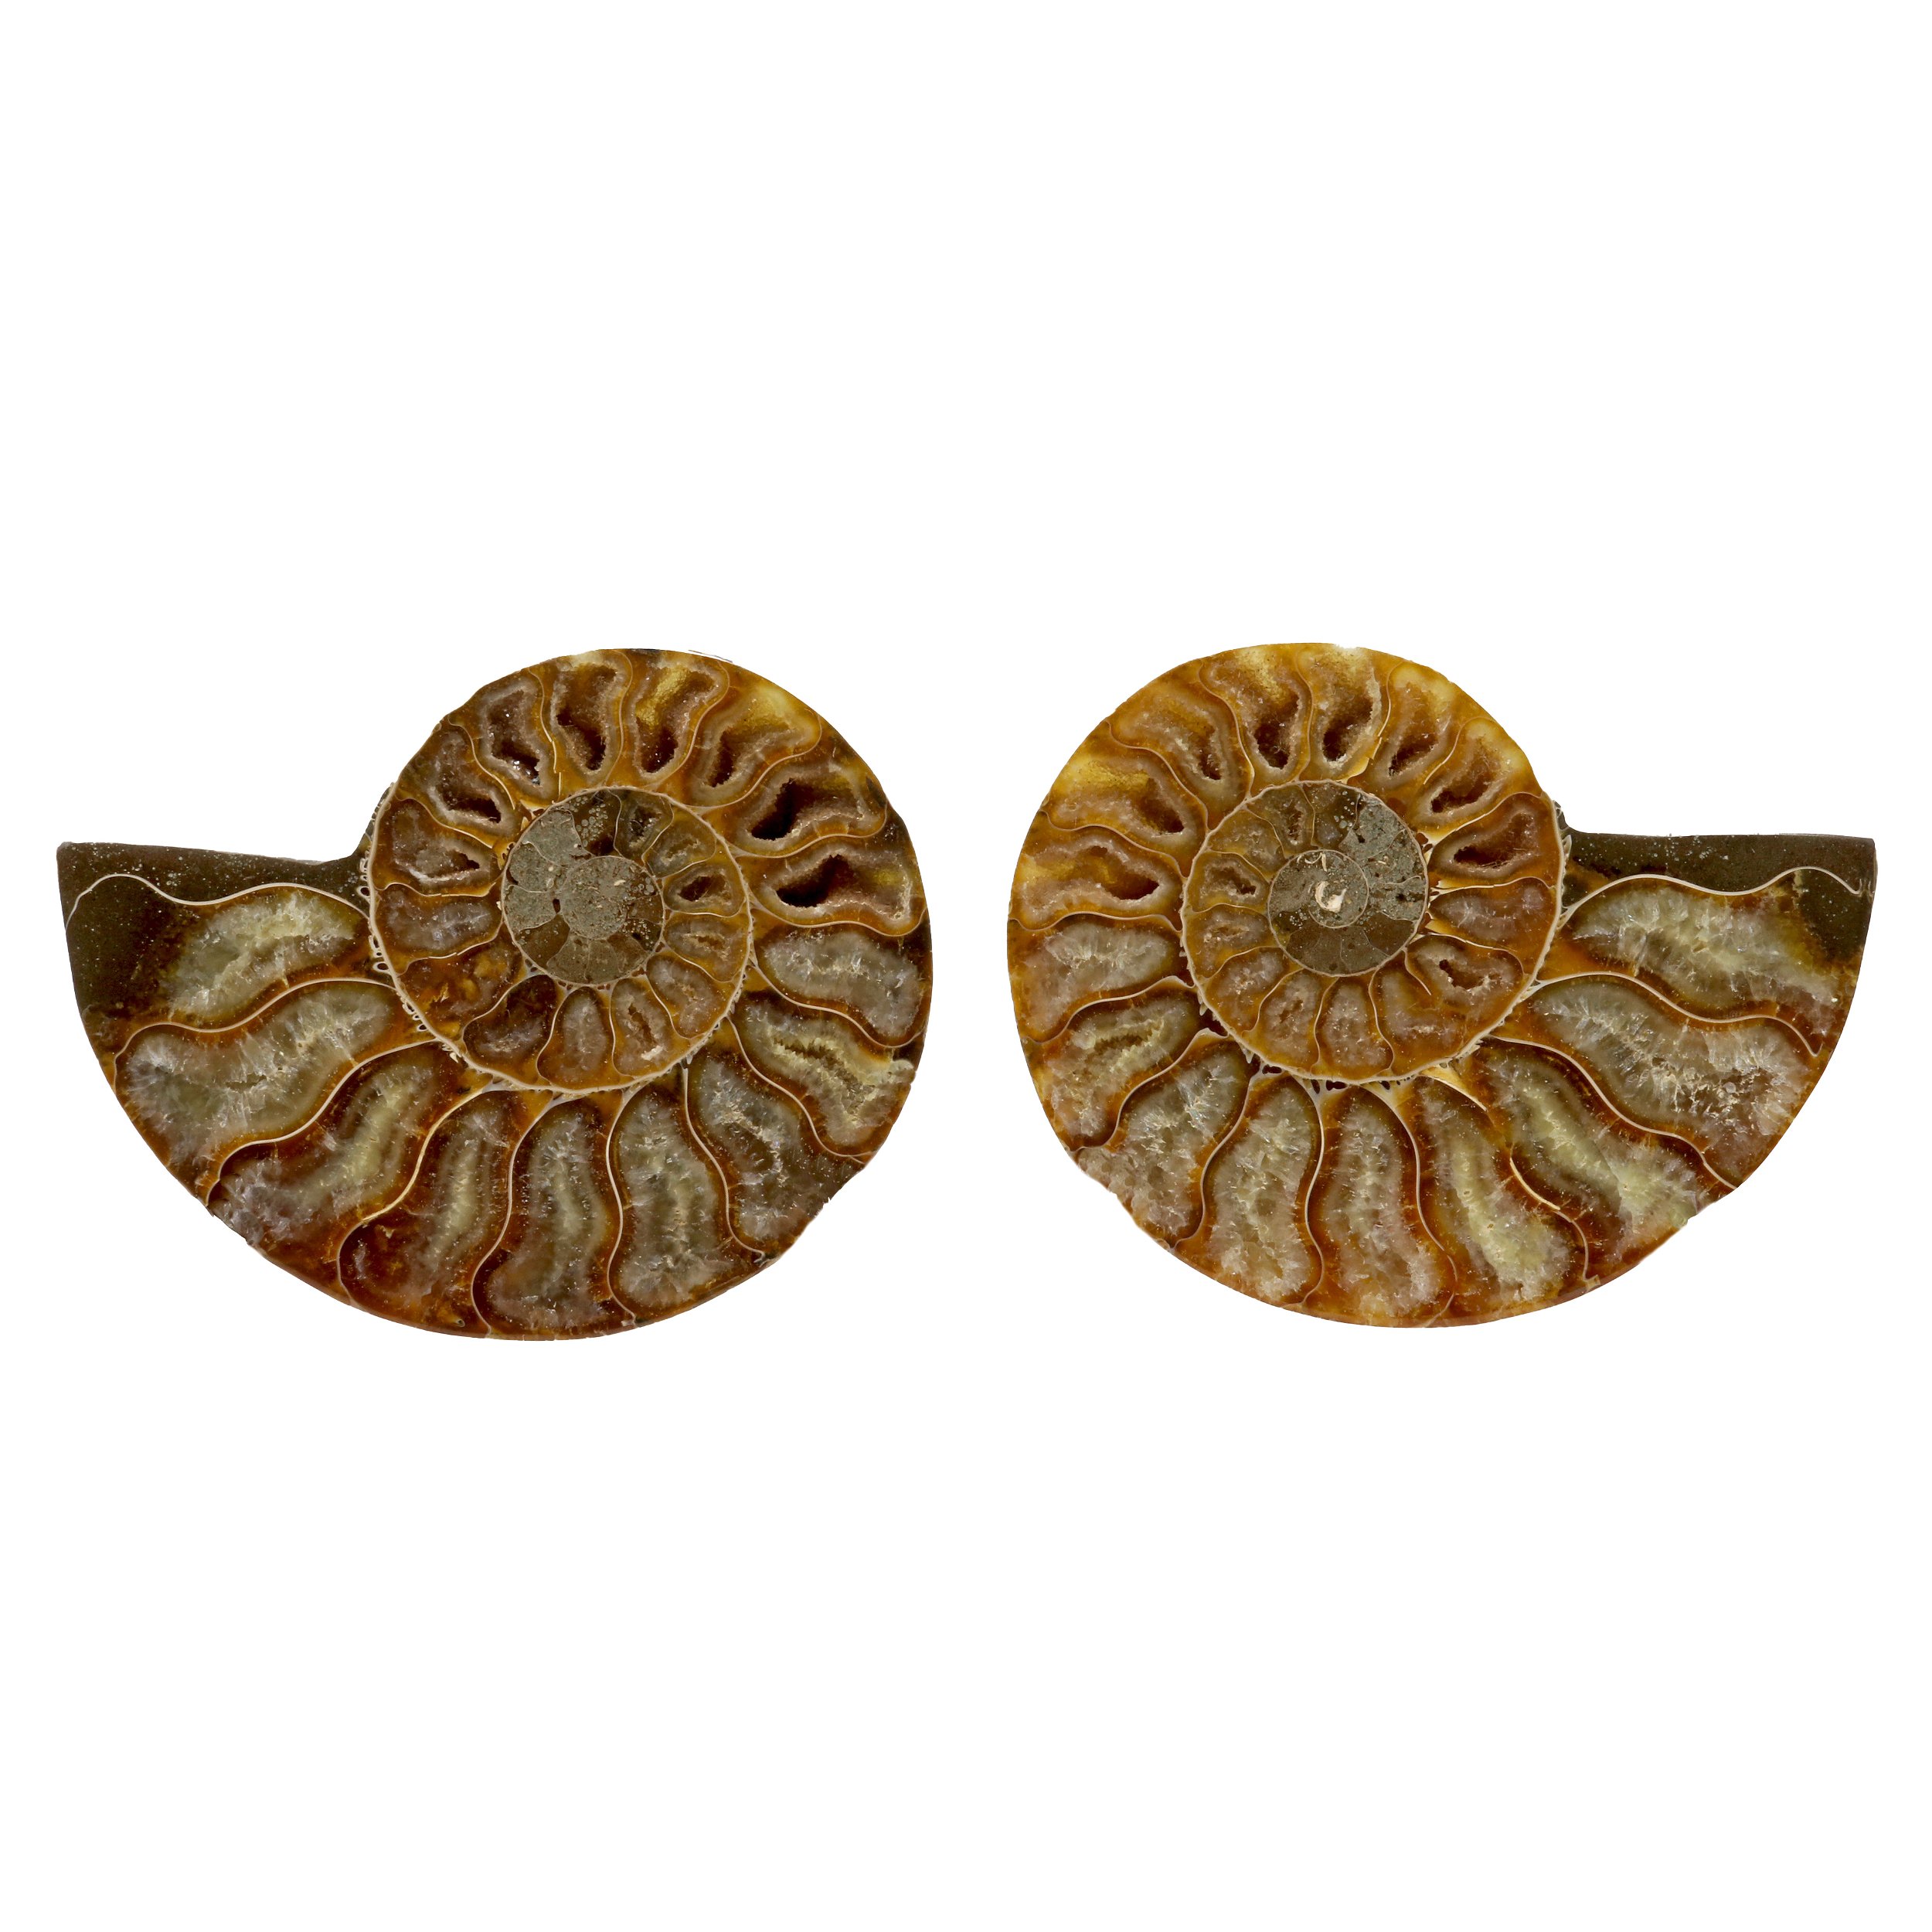 Ammonite Fossil Pair In Acrylic Stands - Light Calcite Face With Druze pockets